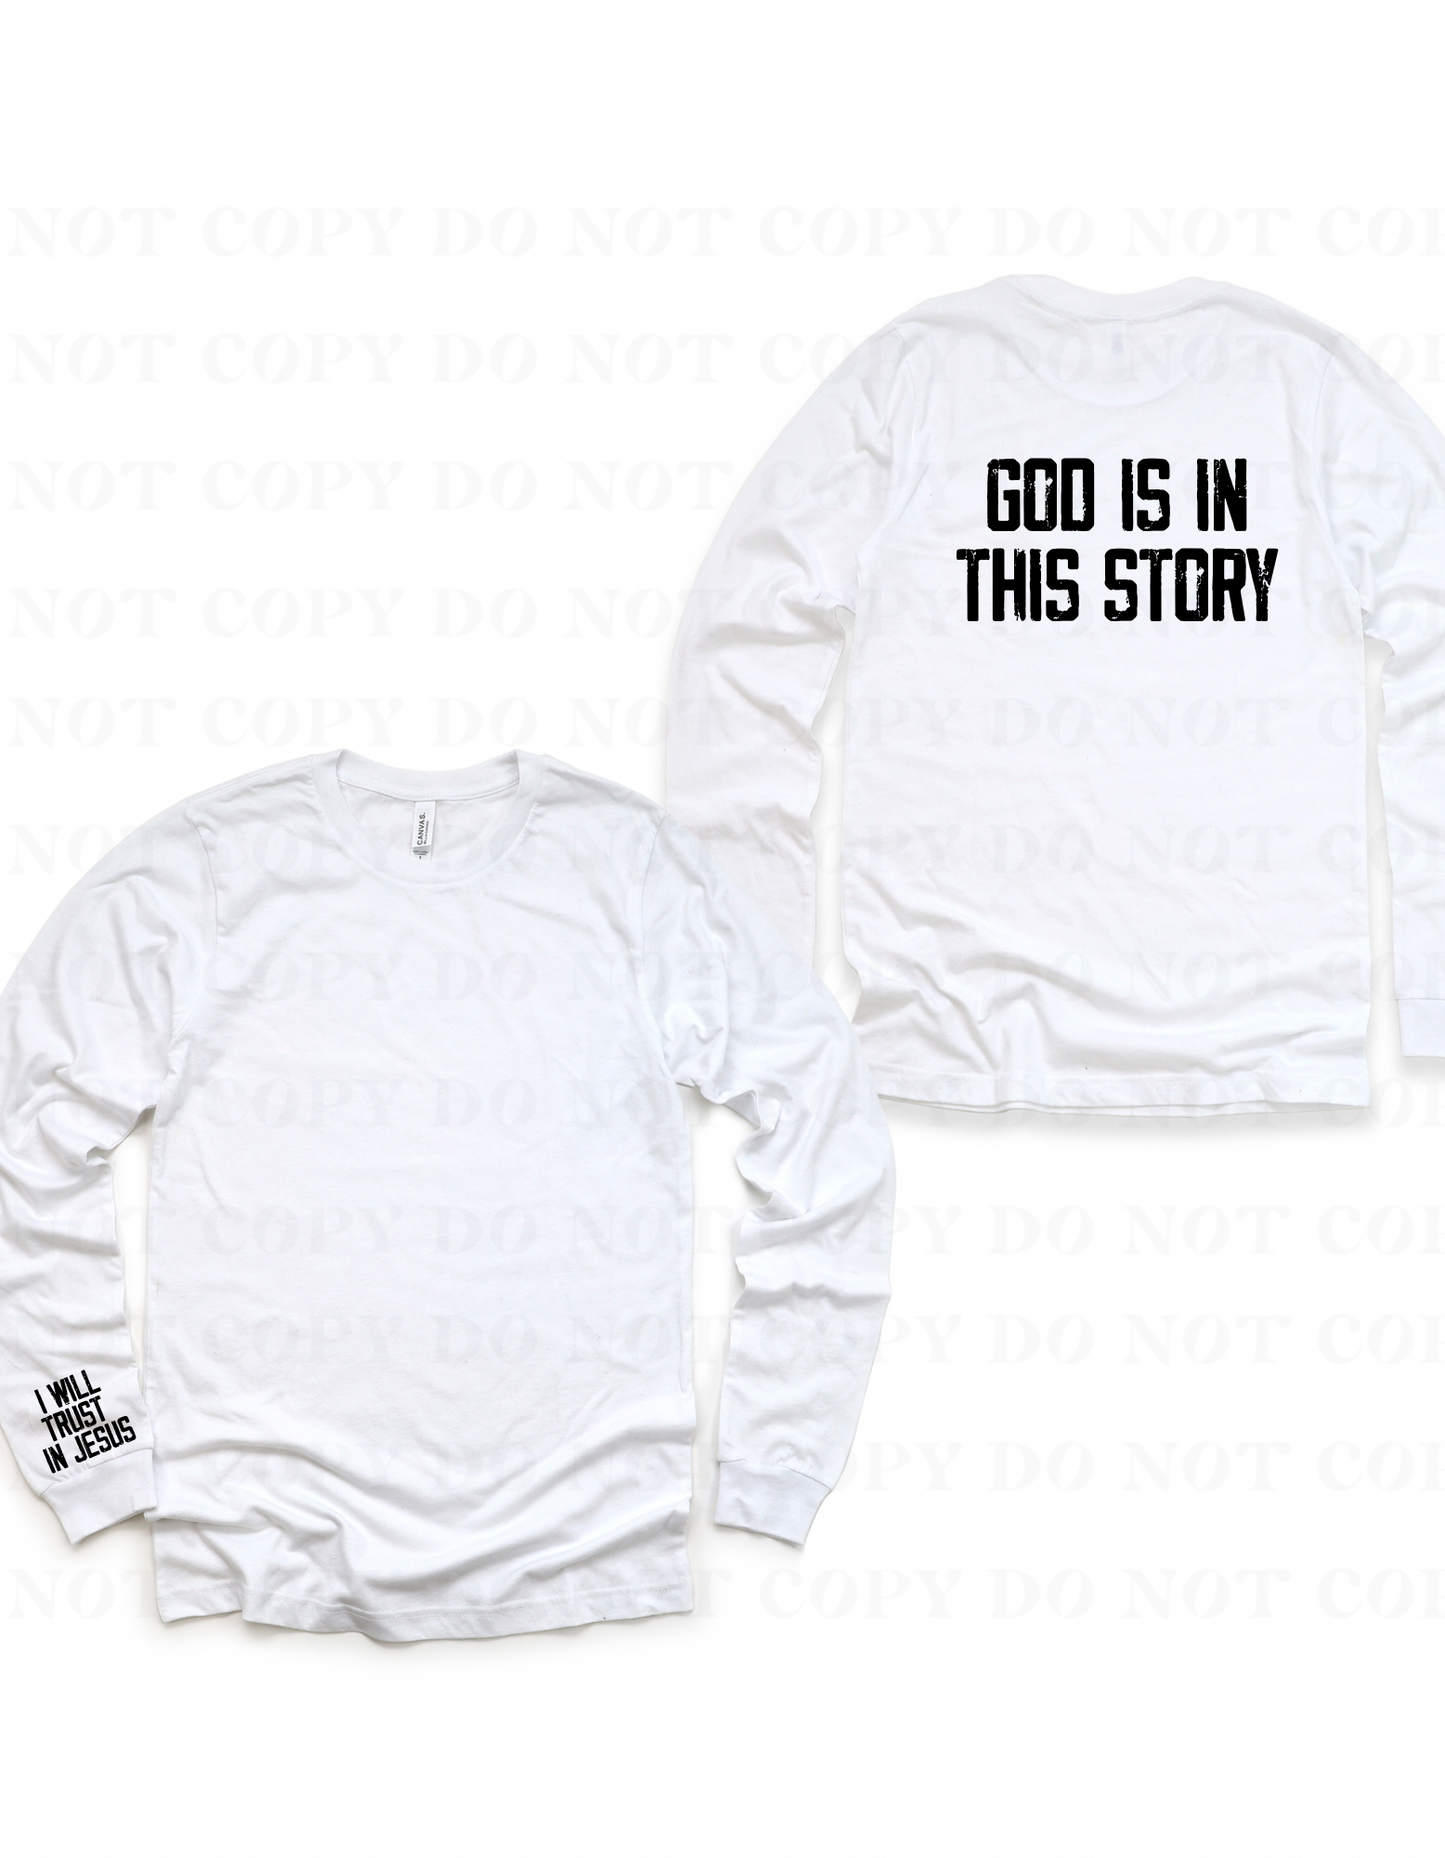 God is in this story-front/back